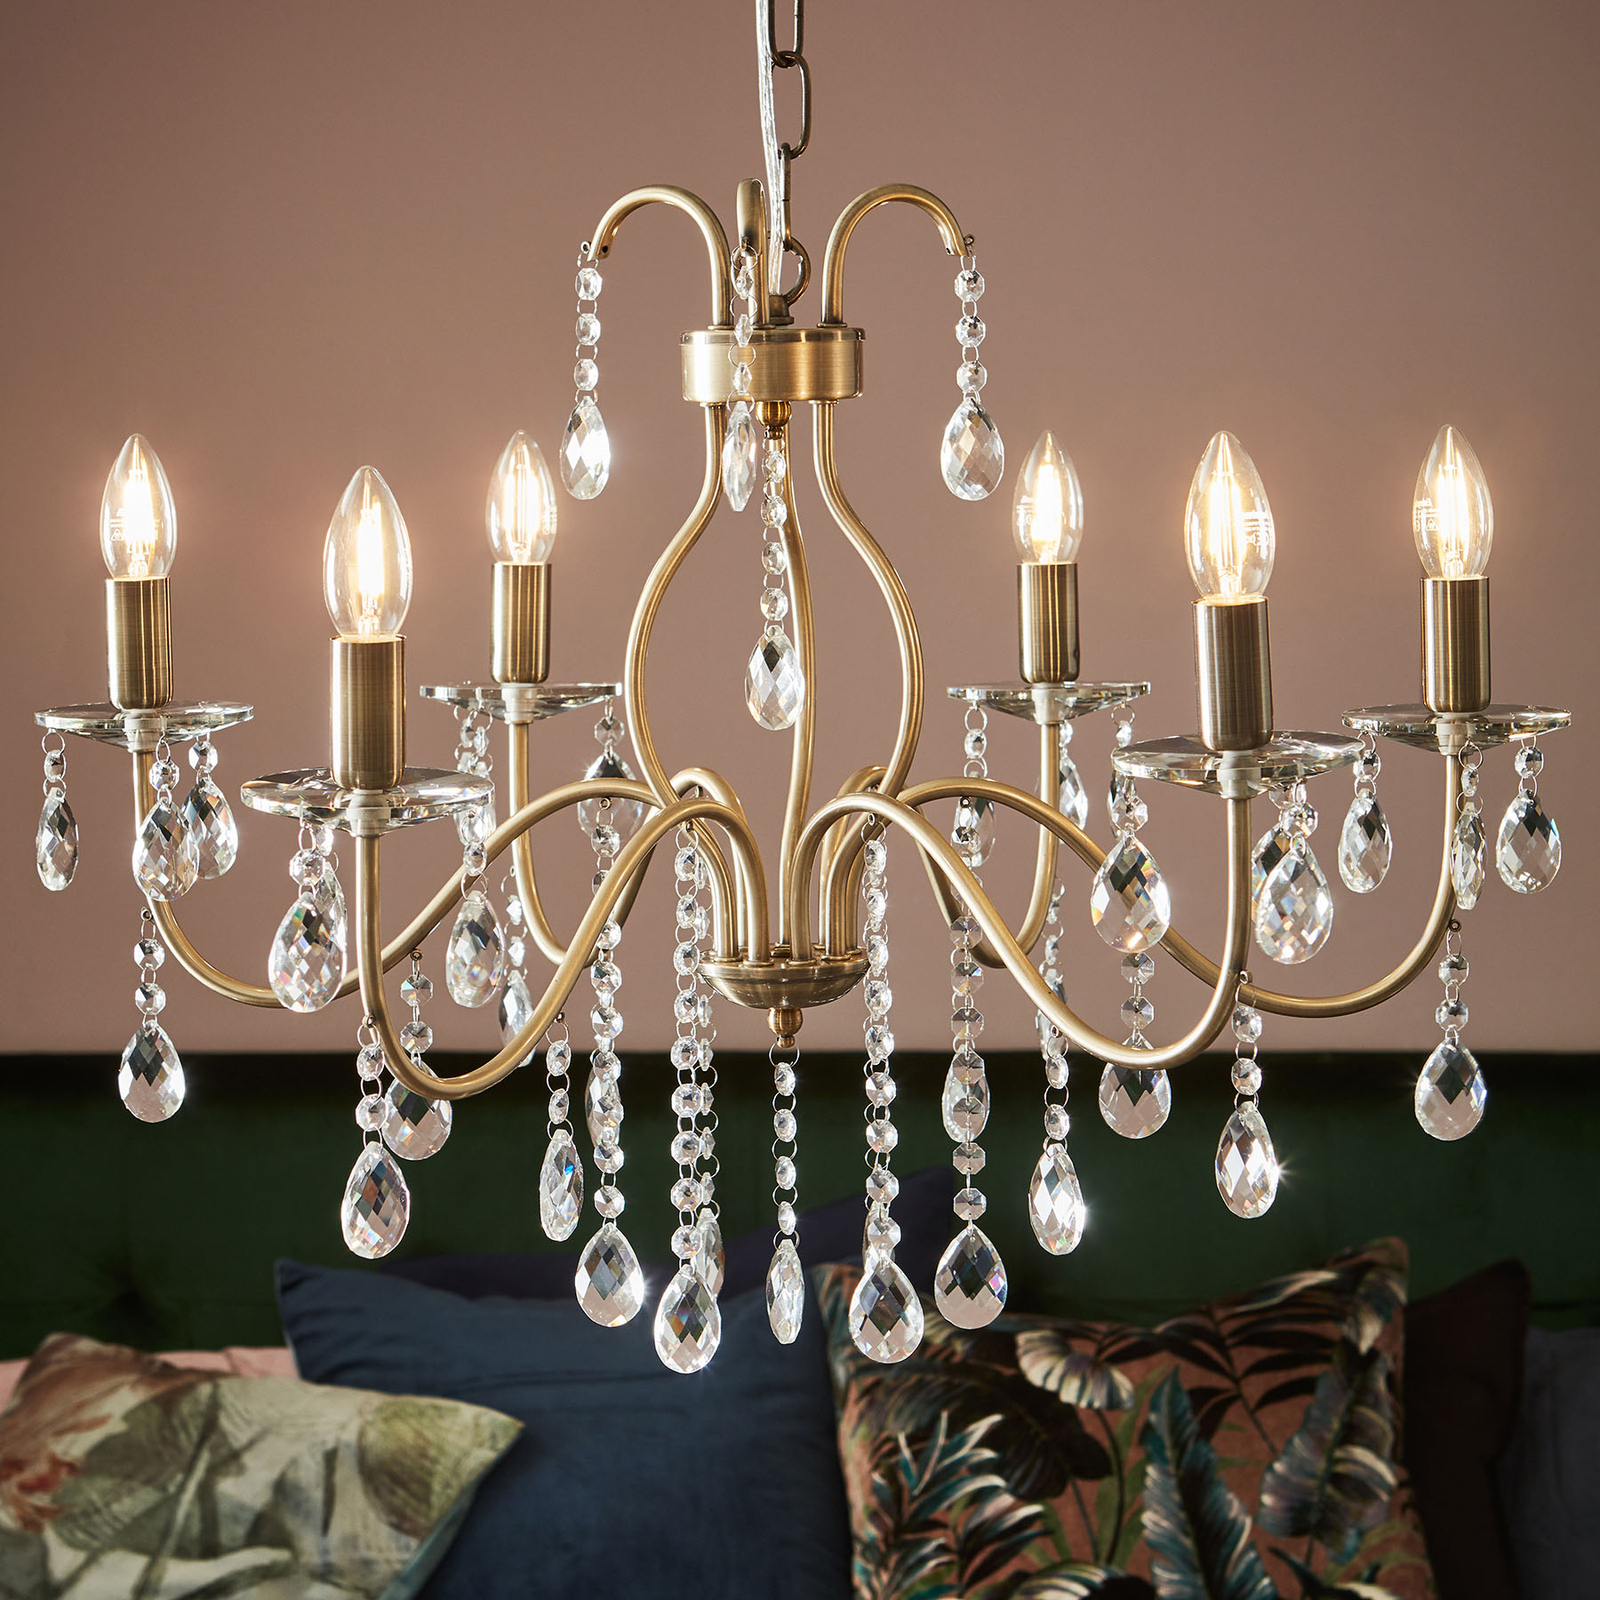 Mary chandelier, antique metal